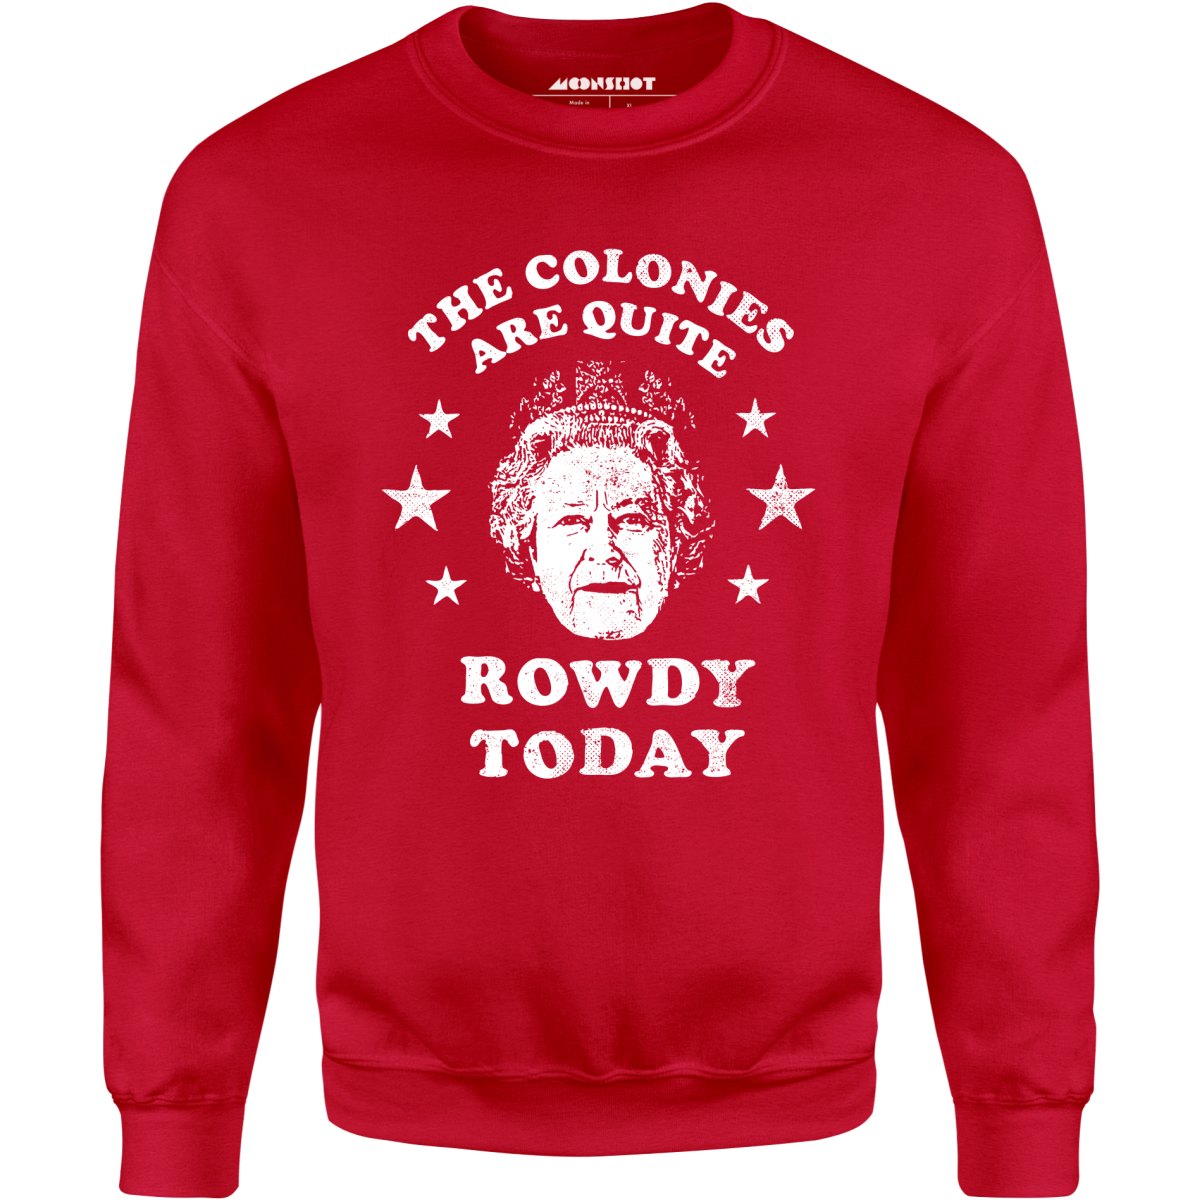 The Colonies Are Quite Rowdy Today - Unisex Sweatshirt